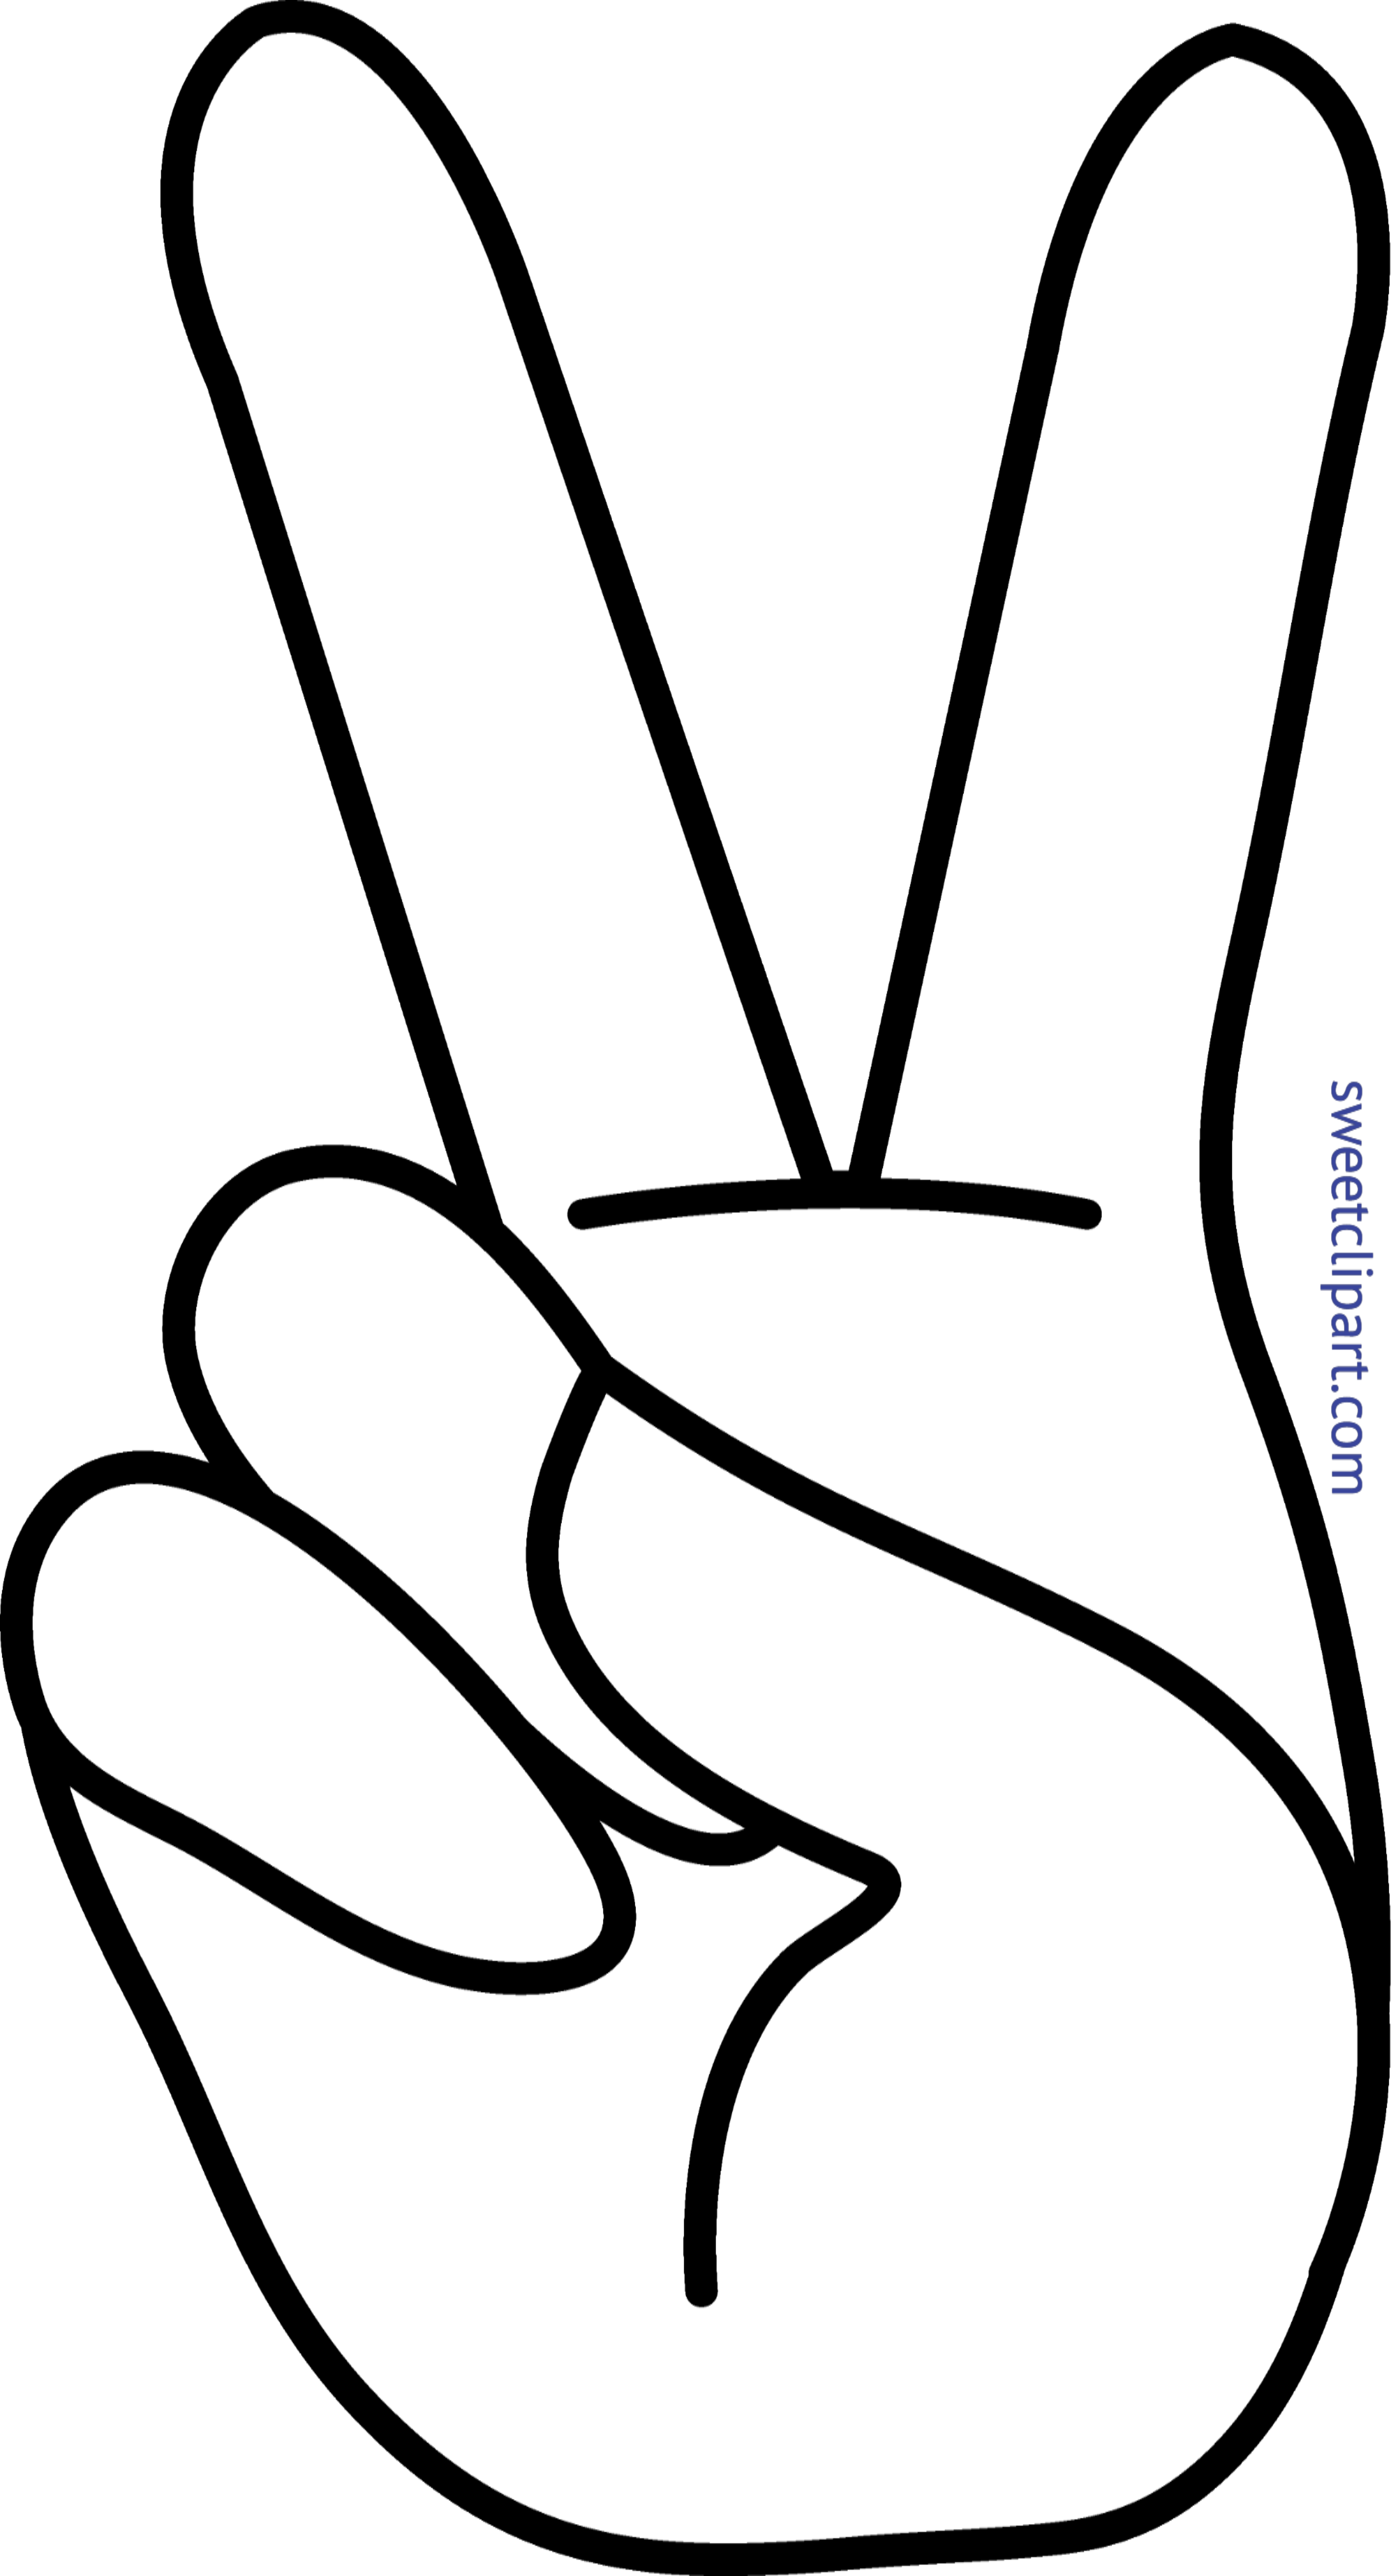 peace clipart hand gesture